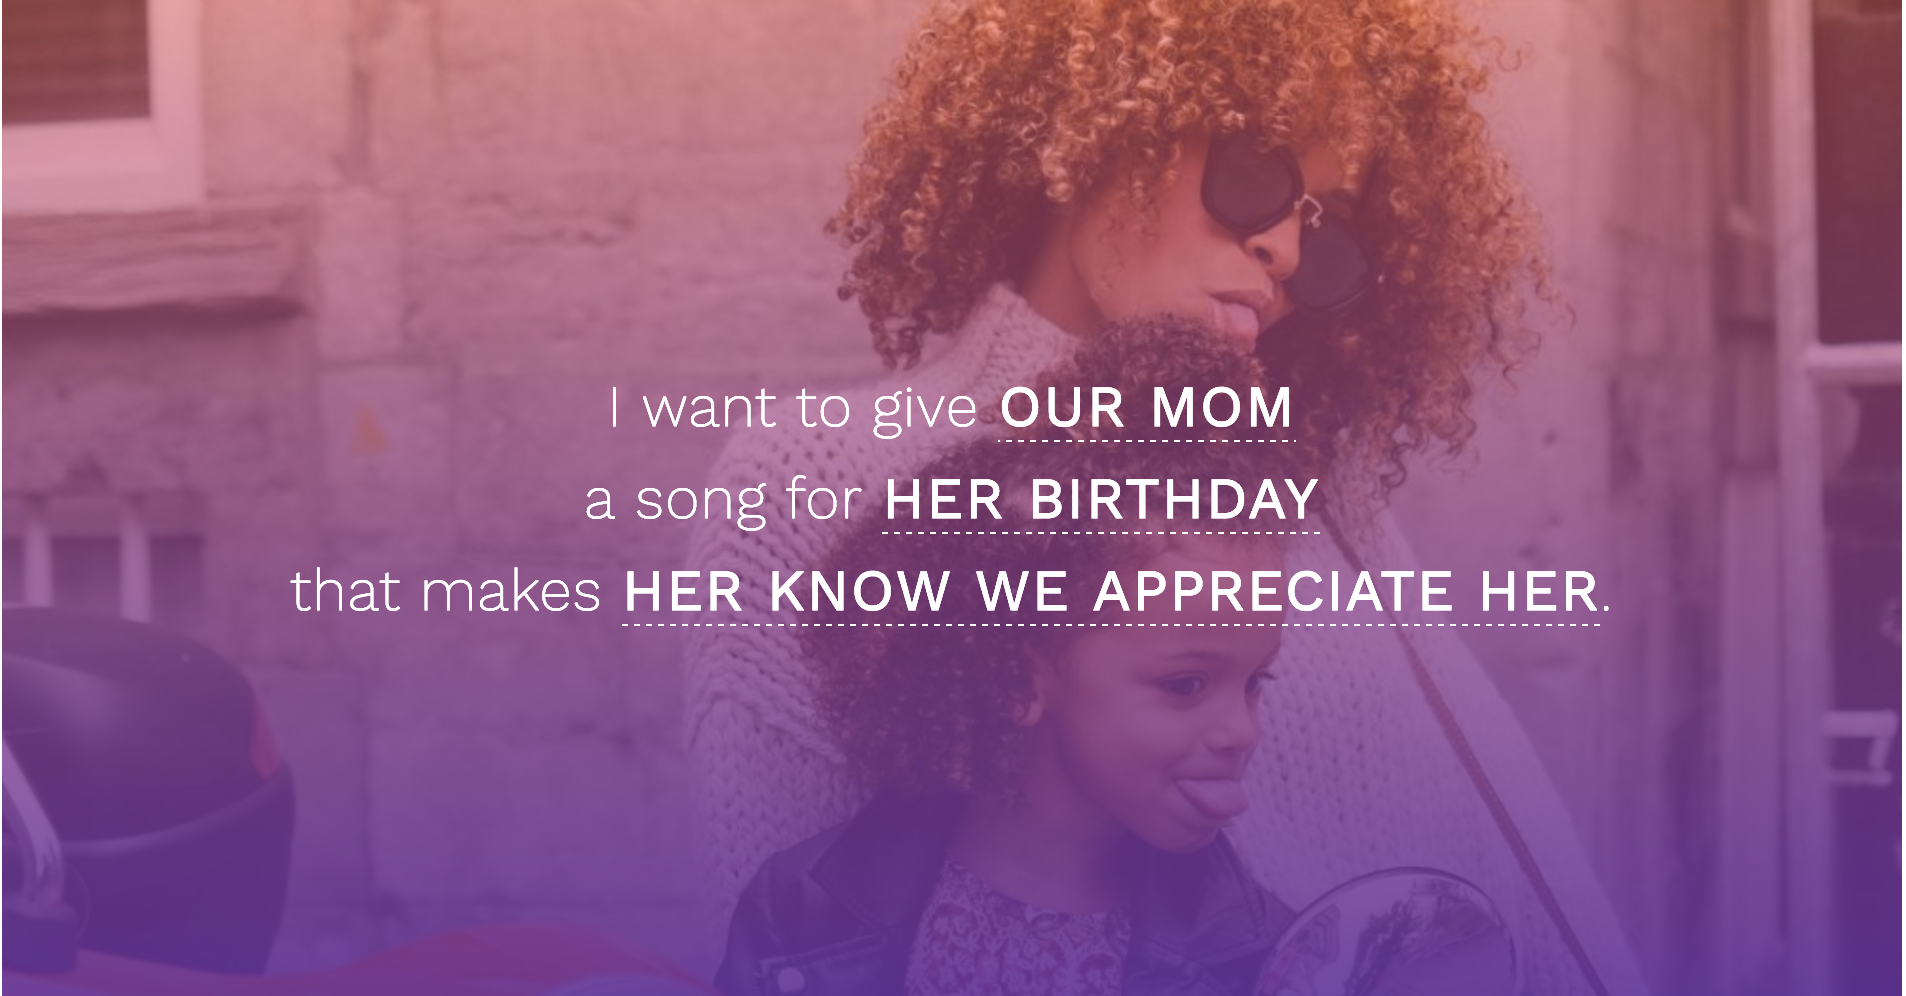 Songfinch can create a personalized song just for your mom on Mother's Day!